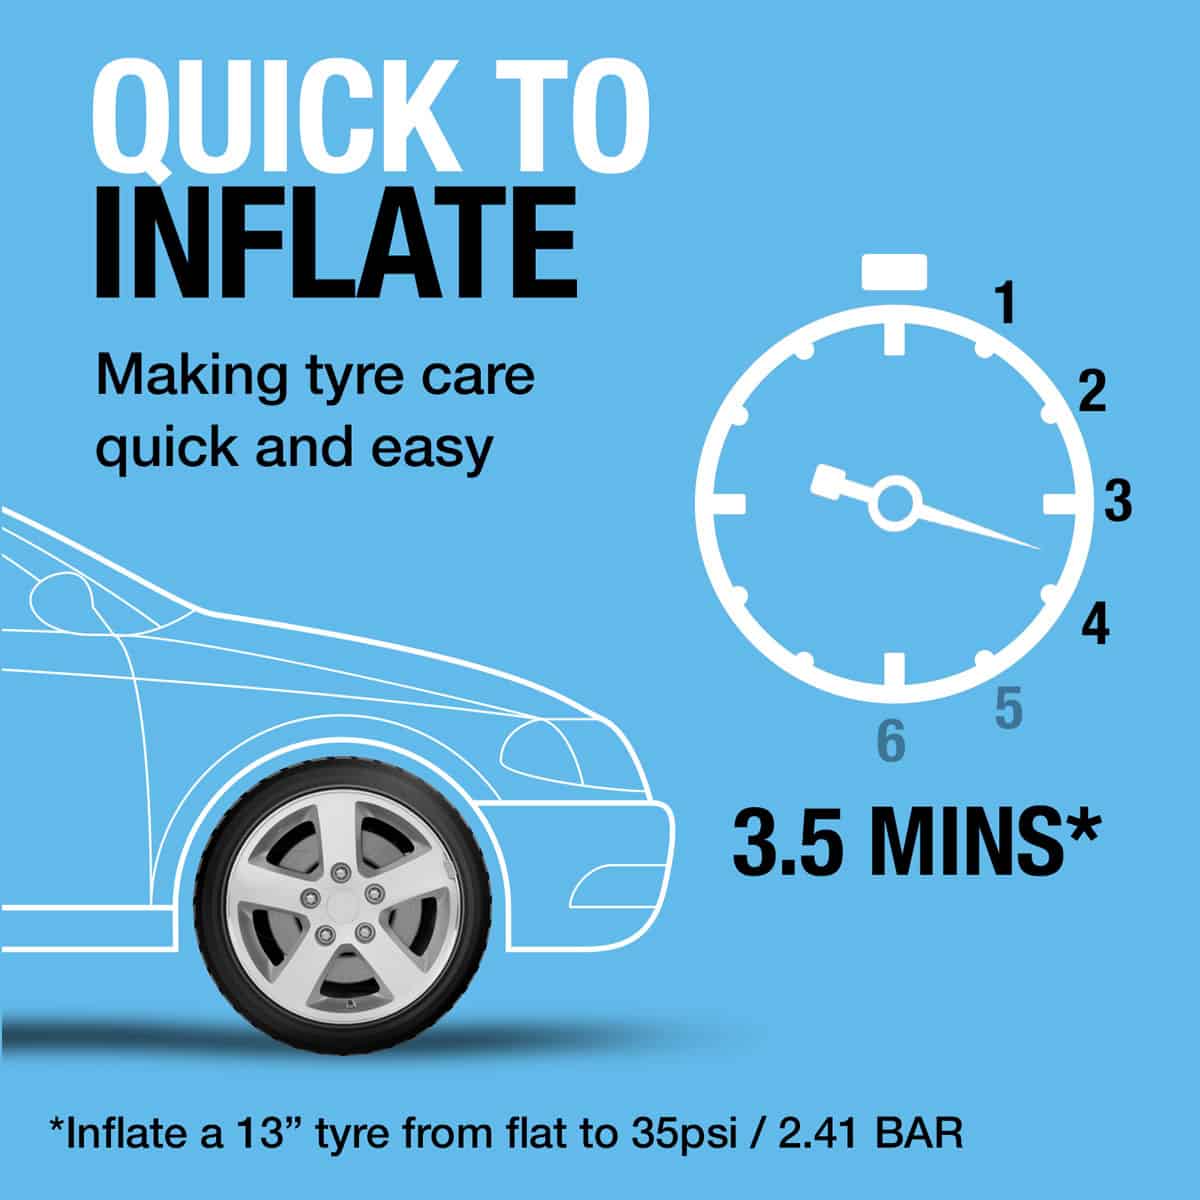 Fast and Efficient Inflation: Inflates a 13" tyre from flat to full in just 3.5 minutes: RING RTC450